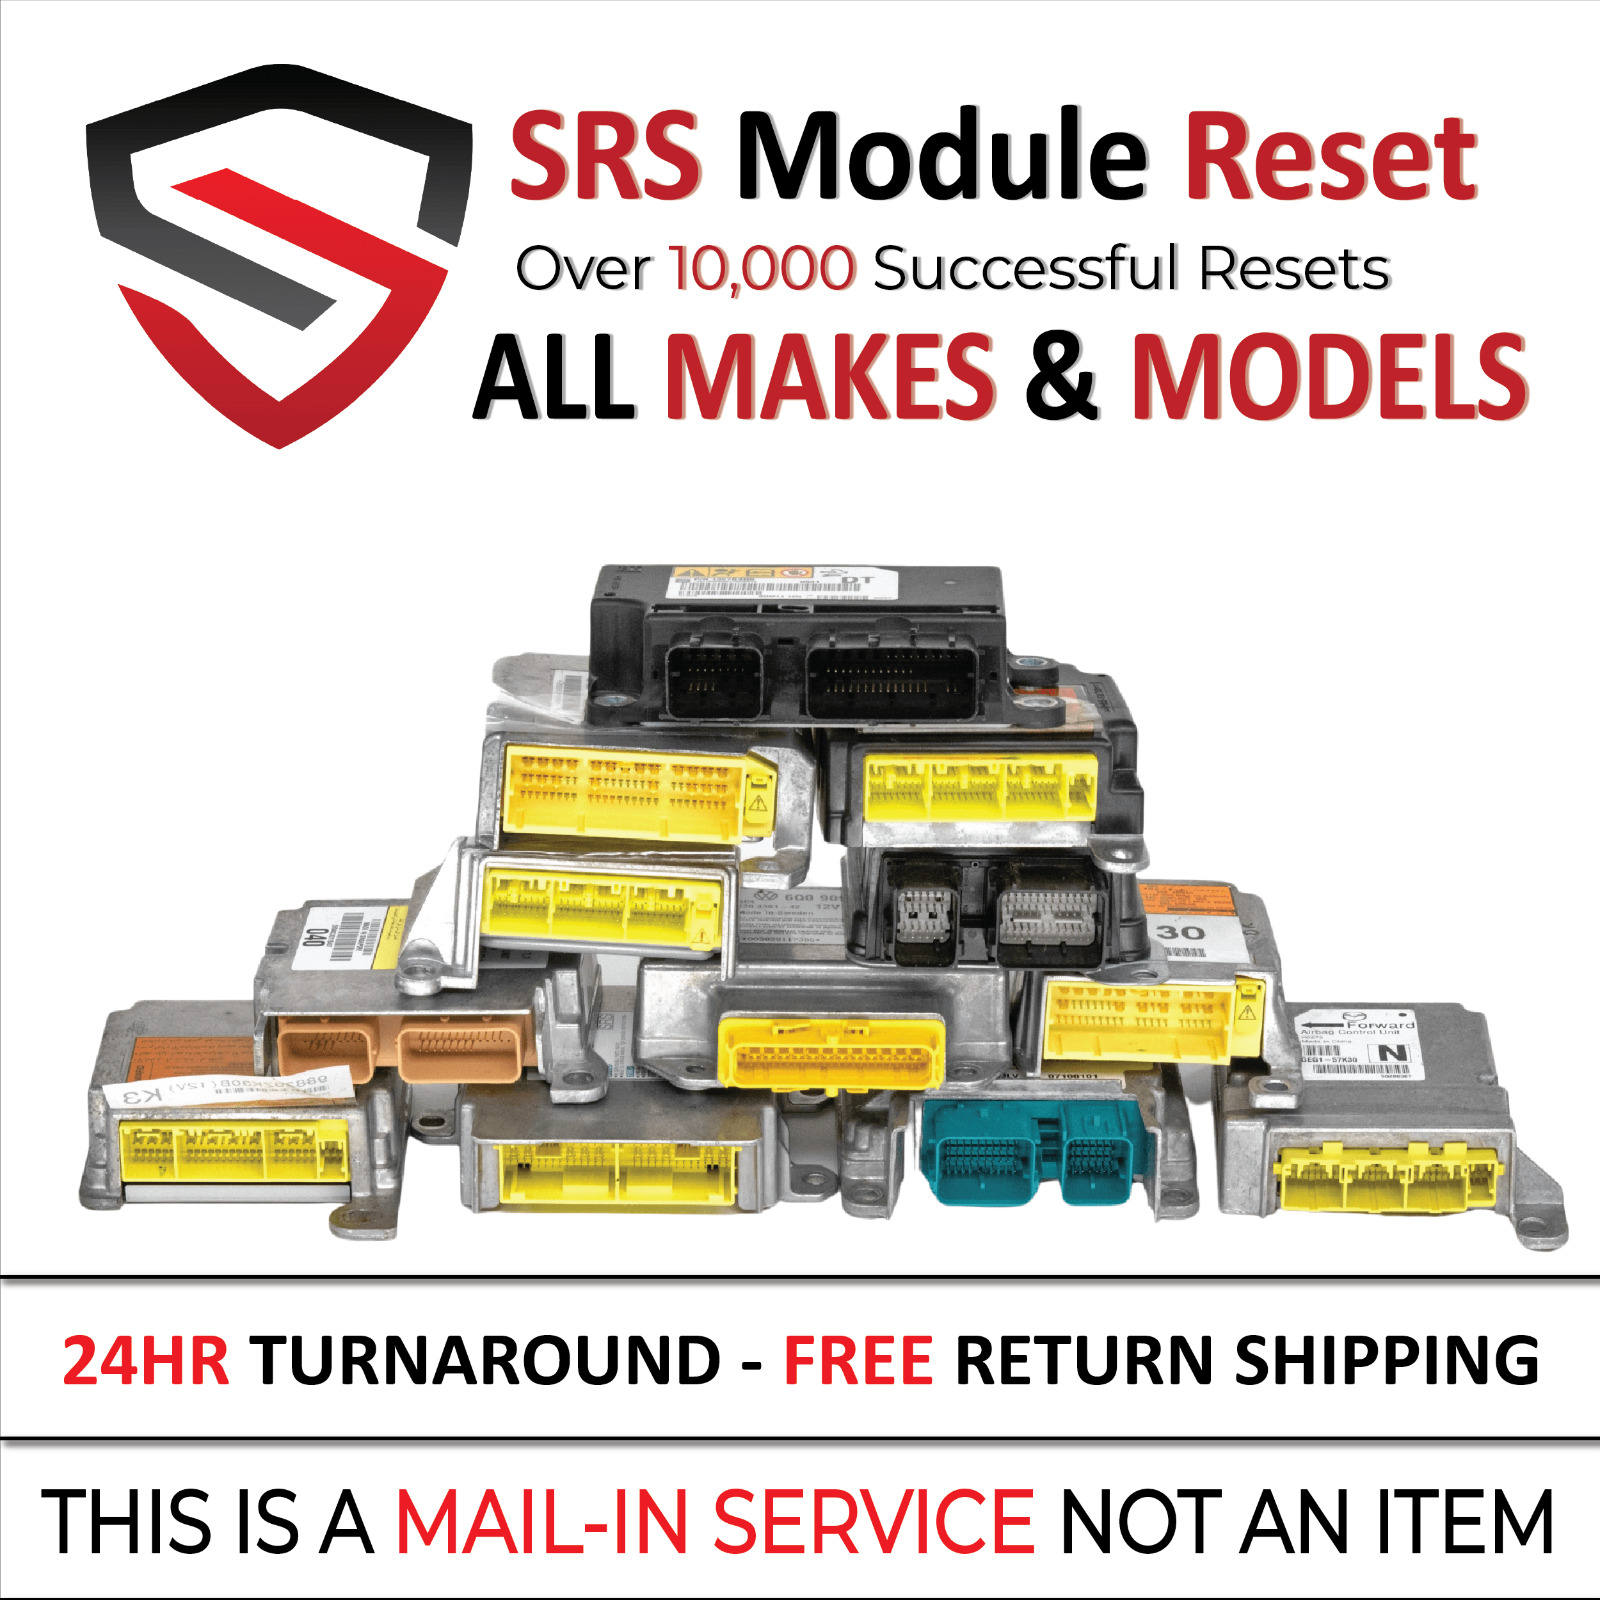 For Mercedes SRS Module Reset Service - Guaranteed or Your Money Back